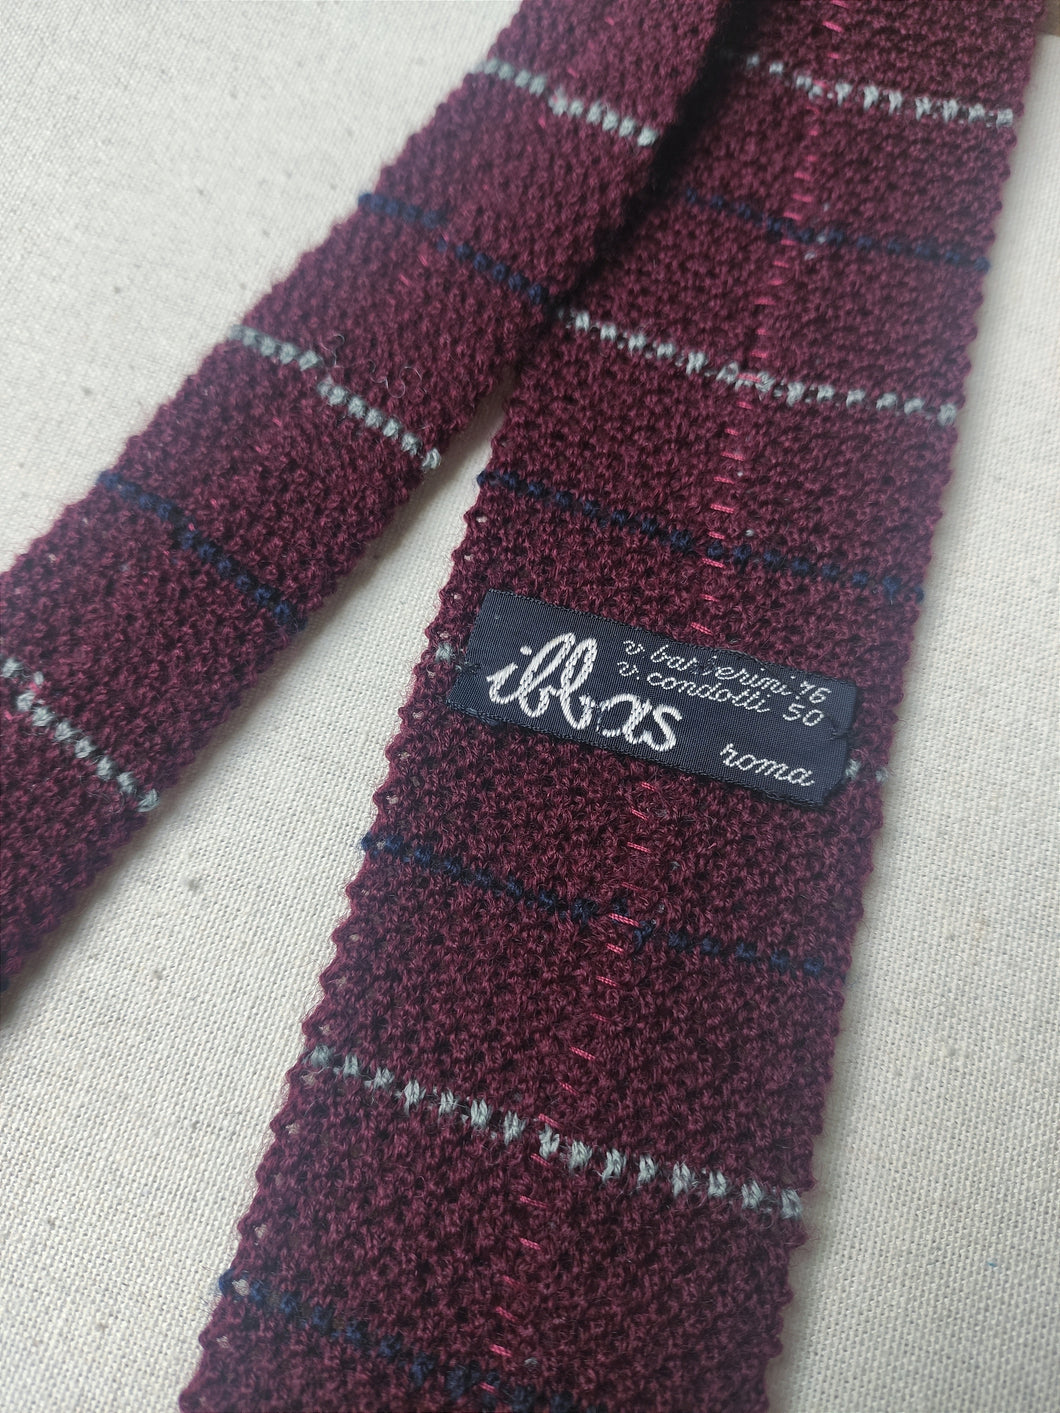 Ibbas Roma cravate tricot bordeaux à rayures en laine Made in Italy